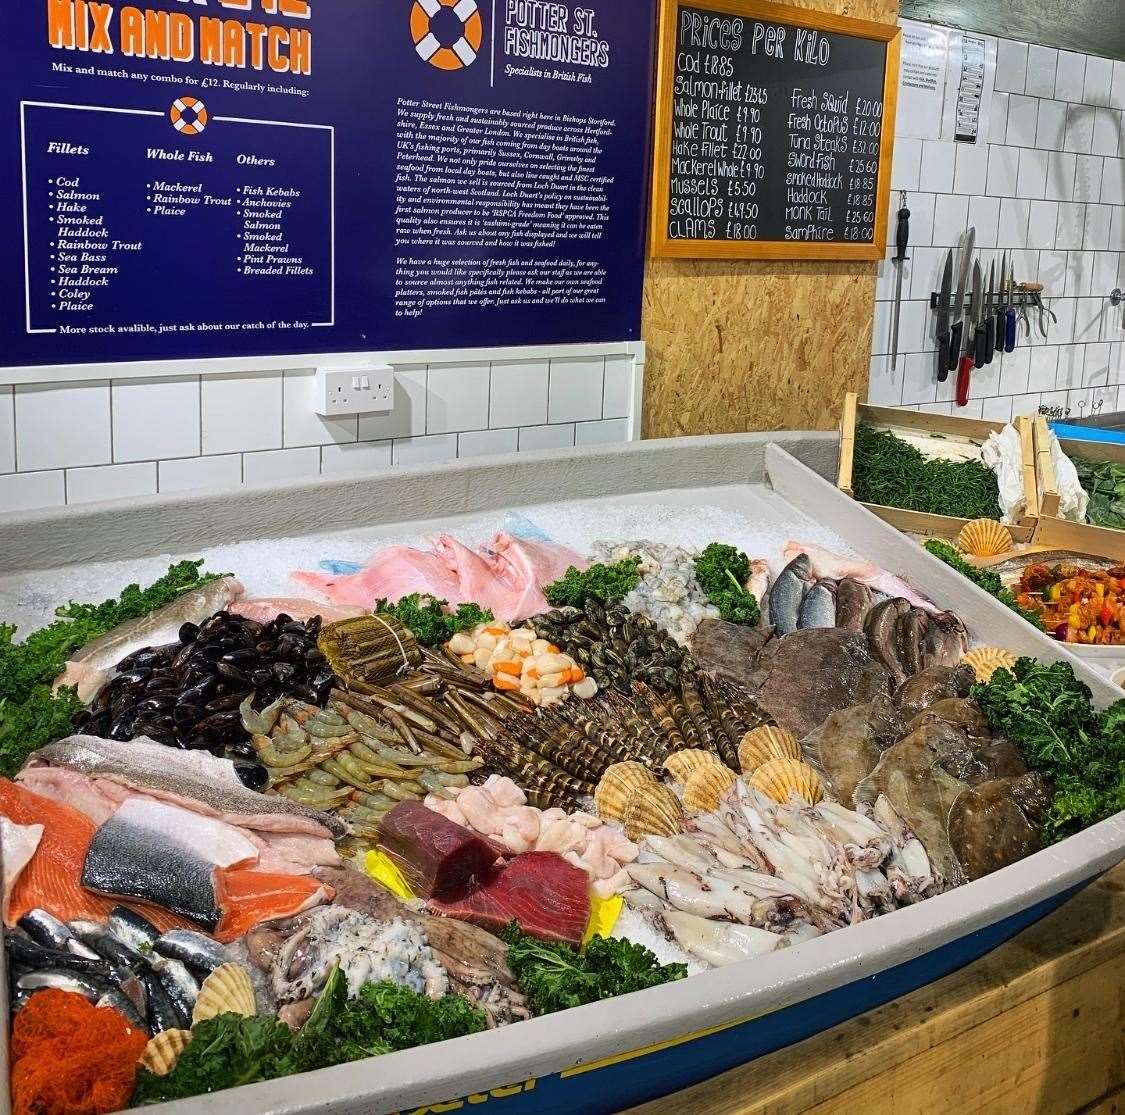 The varied selection of fresh fish available from Potter Street Fishmongers in Eat 17 (32212247)